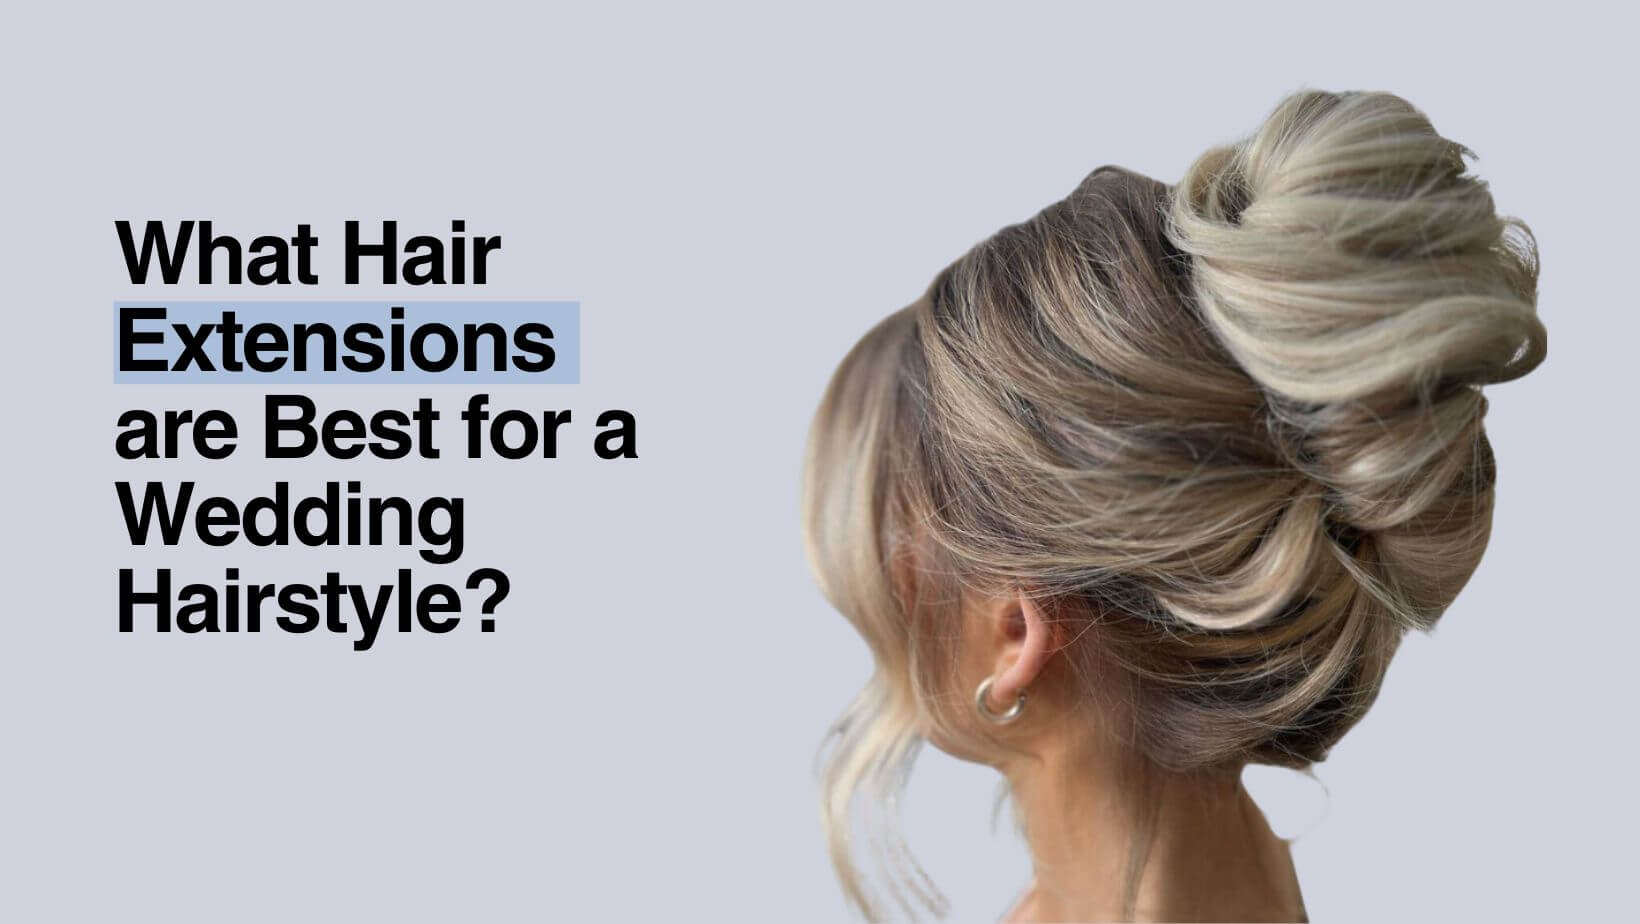 Which hair extensions are best for a wedding hairstyle?